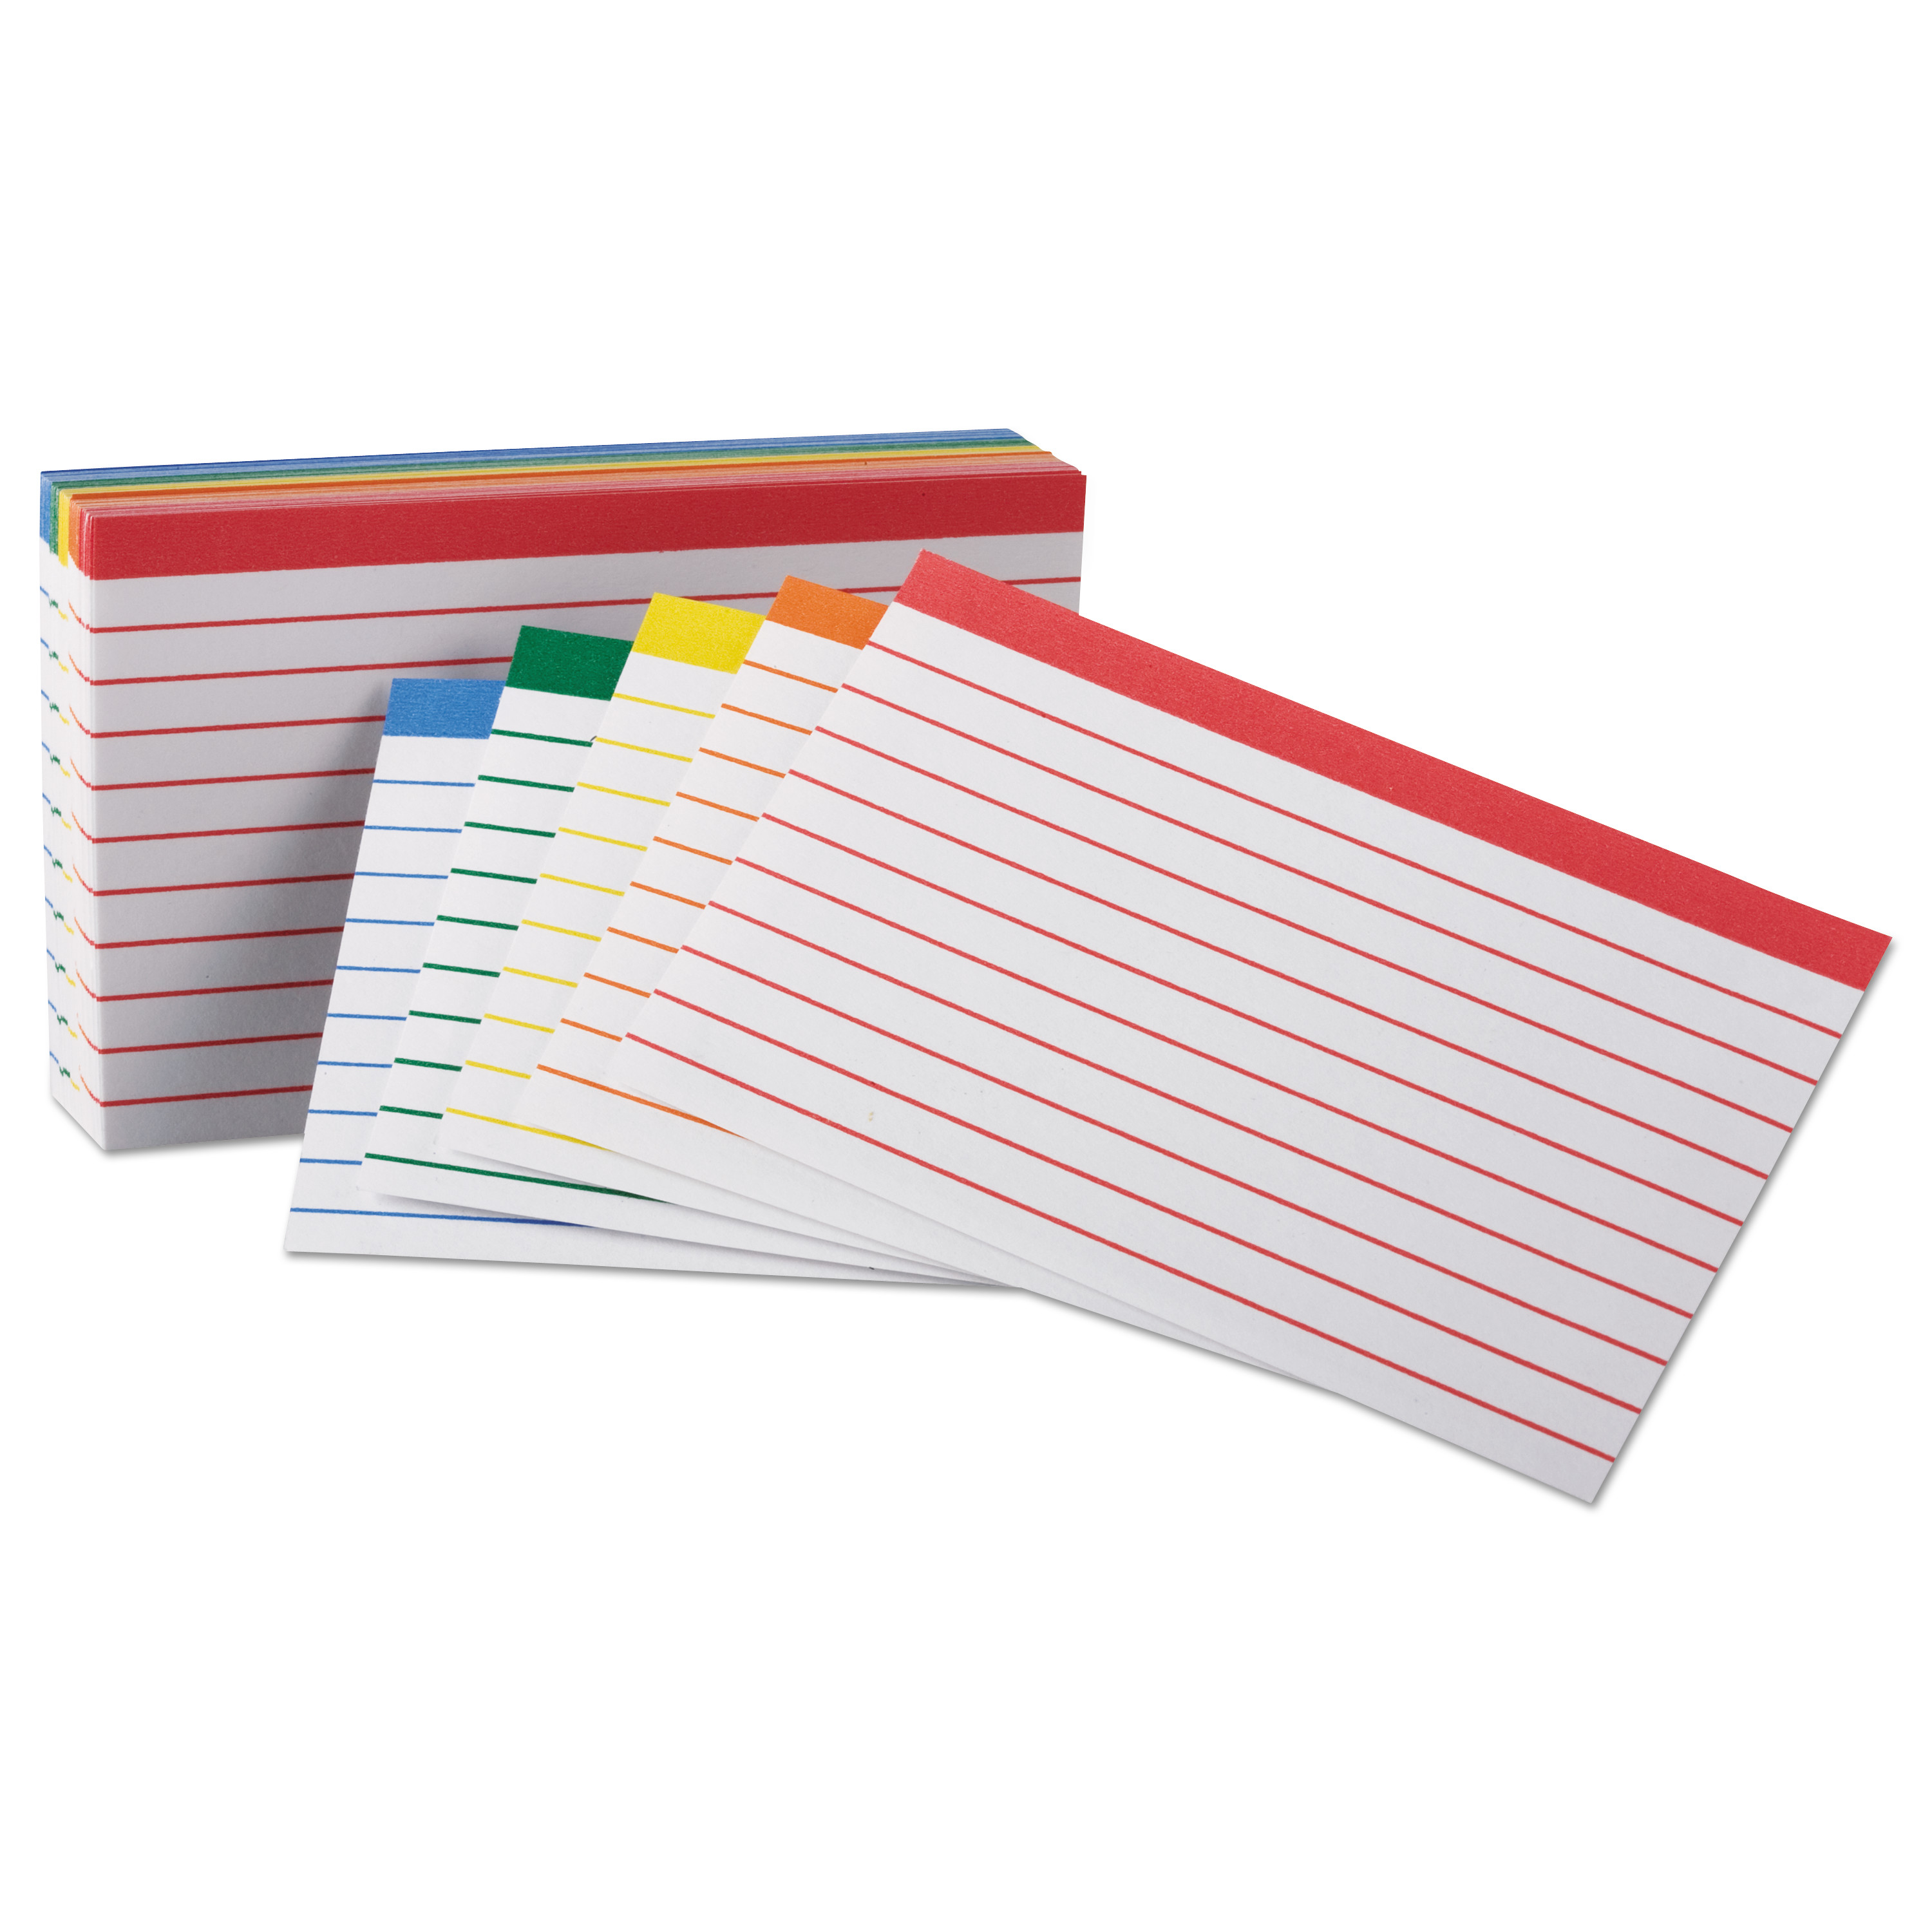 Esselte Ruled Index Cards, 5 x 8,  Assorted Colors - 100 count